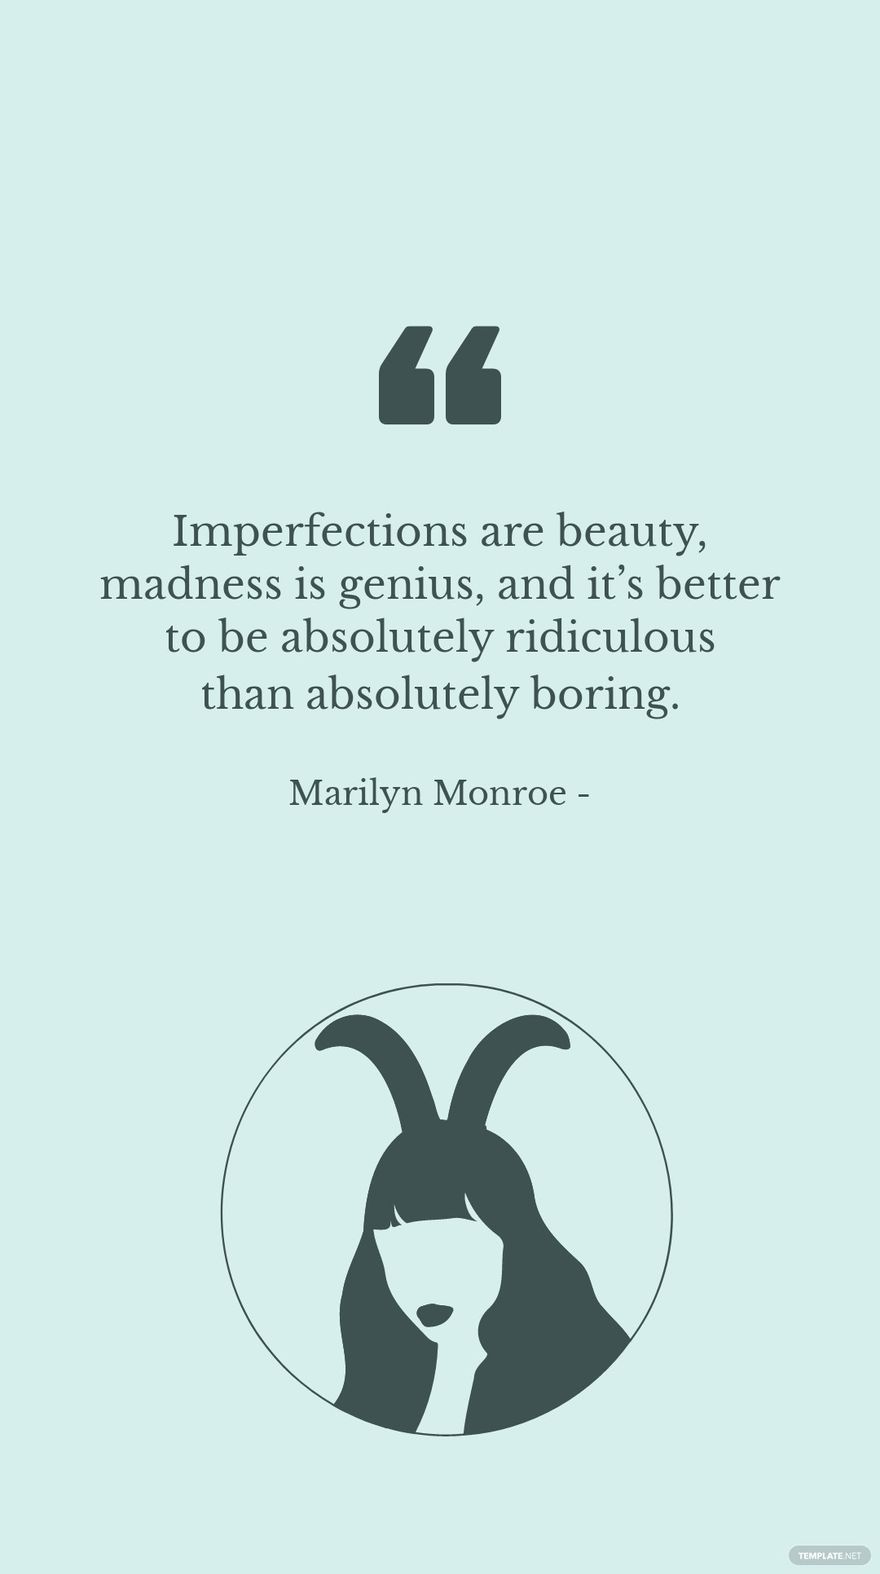 Free Marilyn Monroe - Imperfections are beauty, madness is genius, and it’s better to be absolutely ridiculous than absolutely boring. in JPG